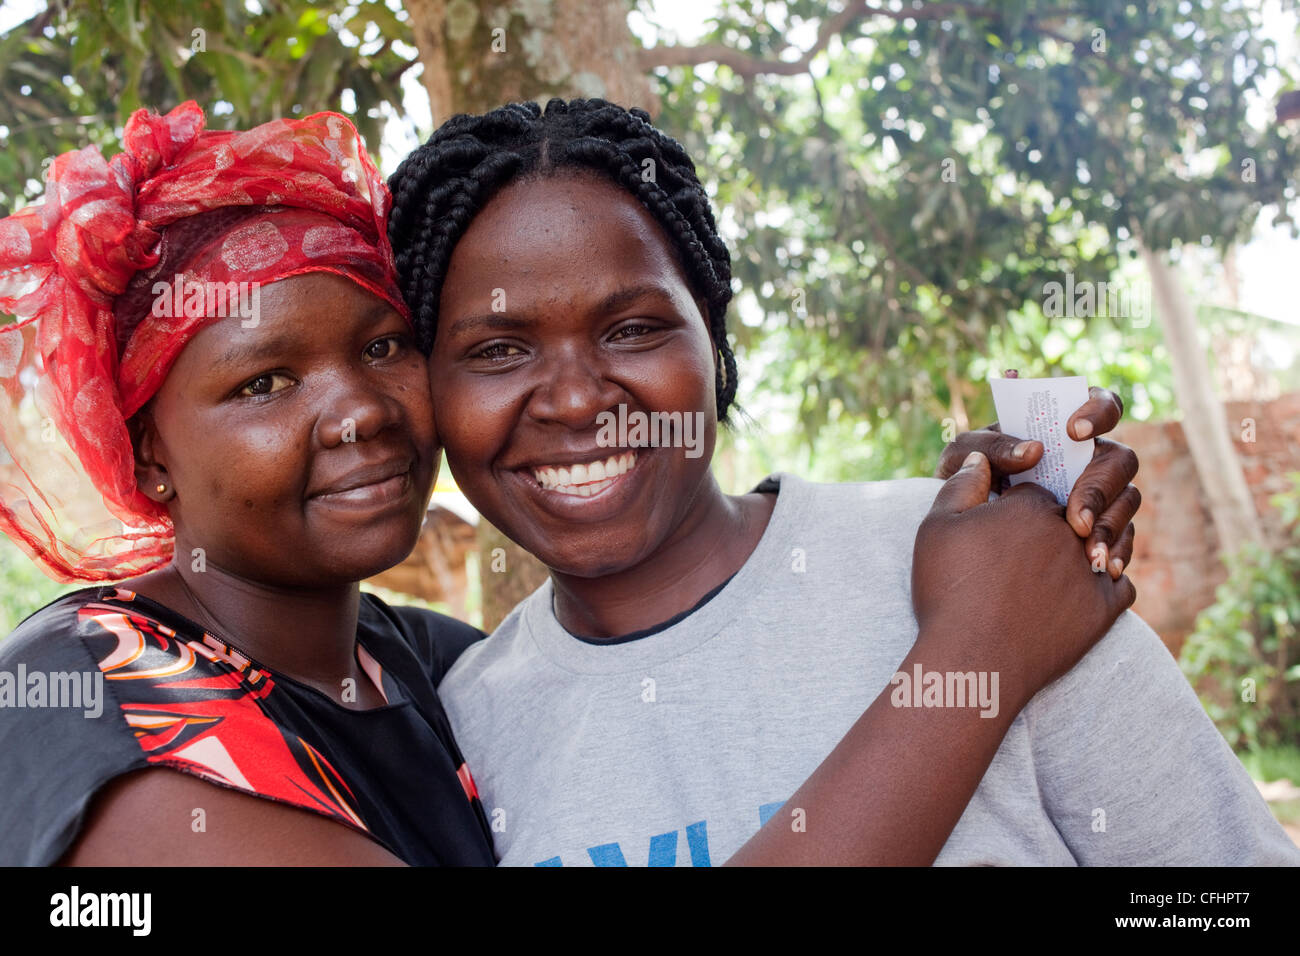 One of Joseph Kony's wives (on left) with a former LRA soldier turned activist, Grace, are posing for a picture Stock Photo